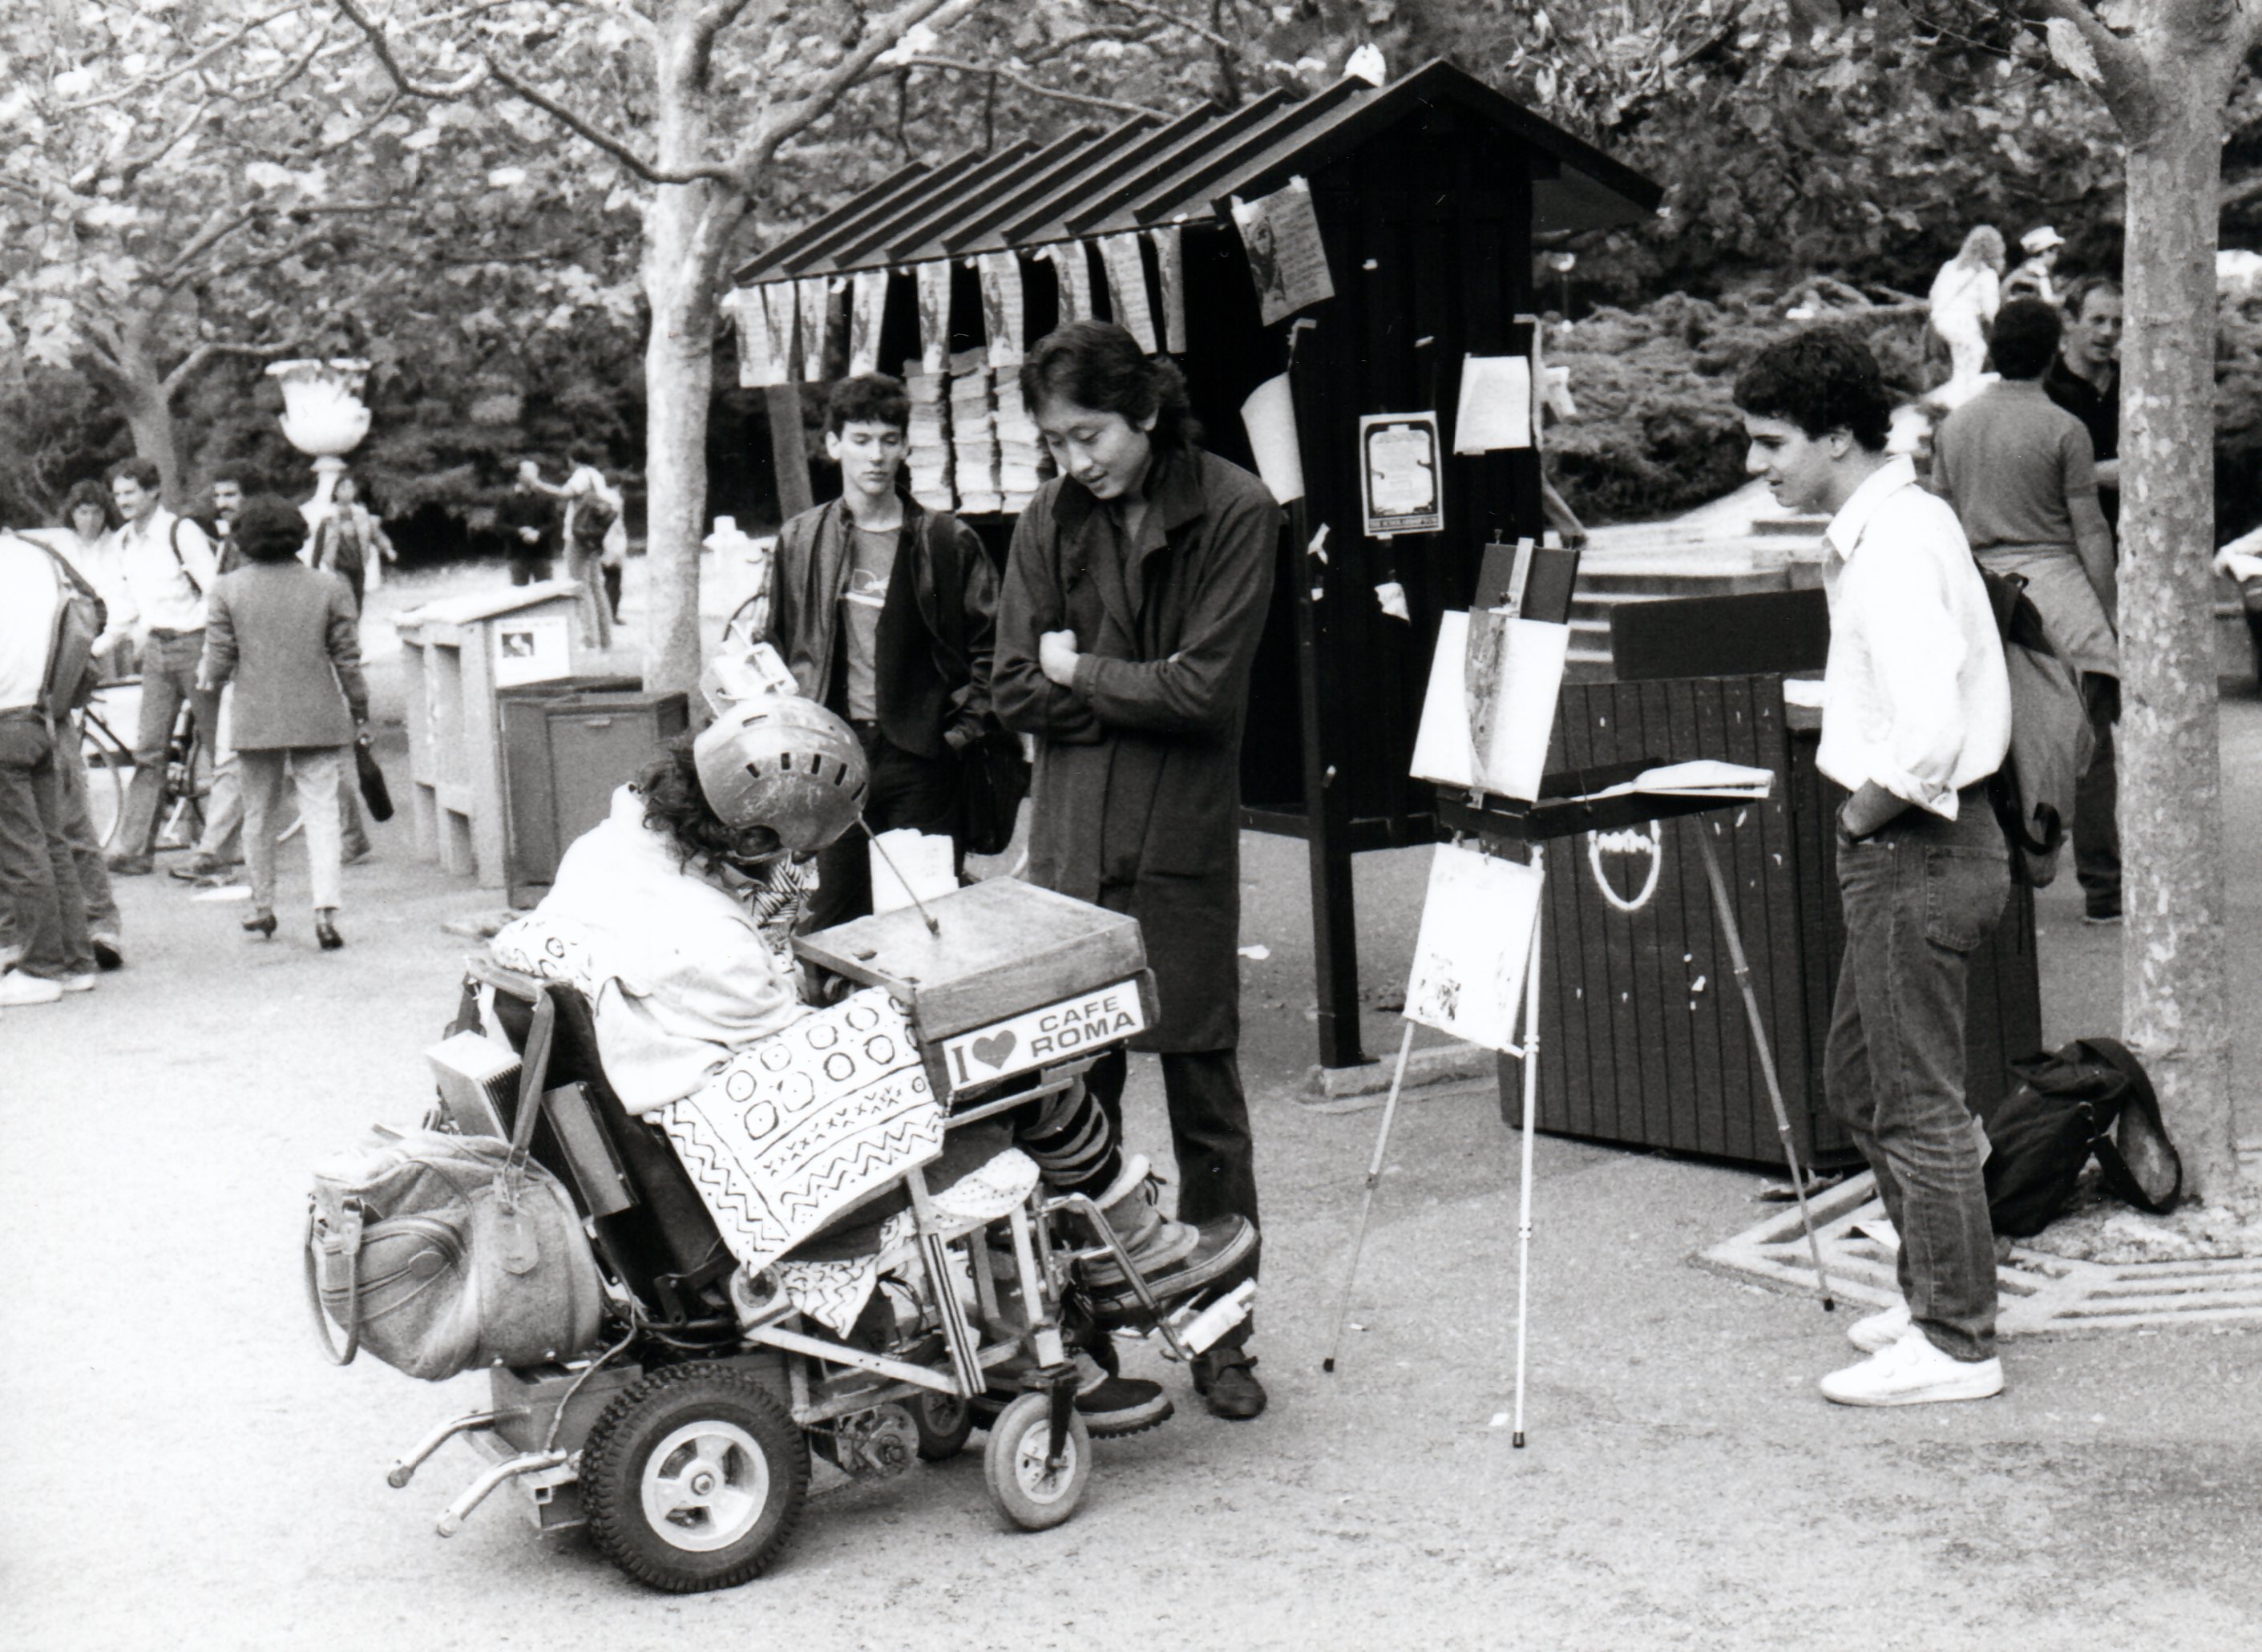 Frank Moore on Sproul Plaza, October 1984. Photo by Steven Black.